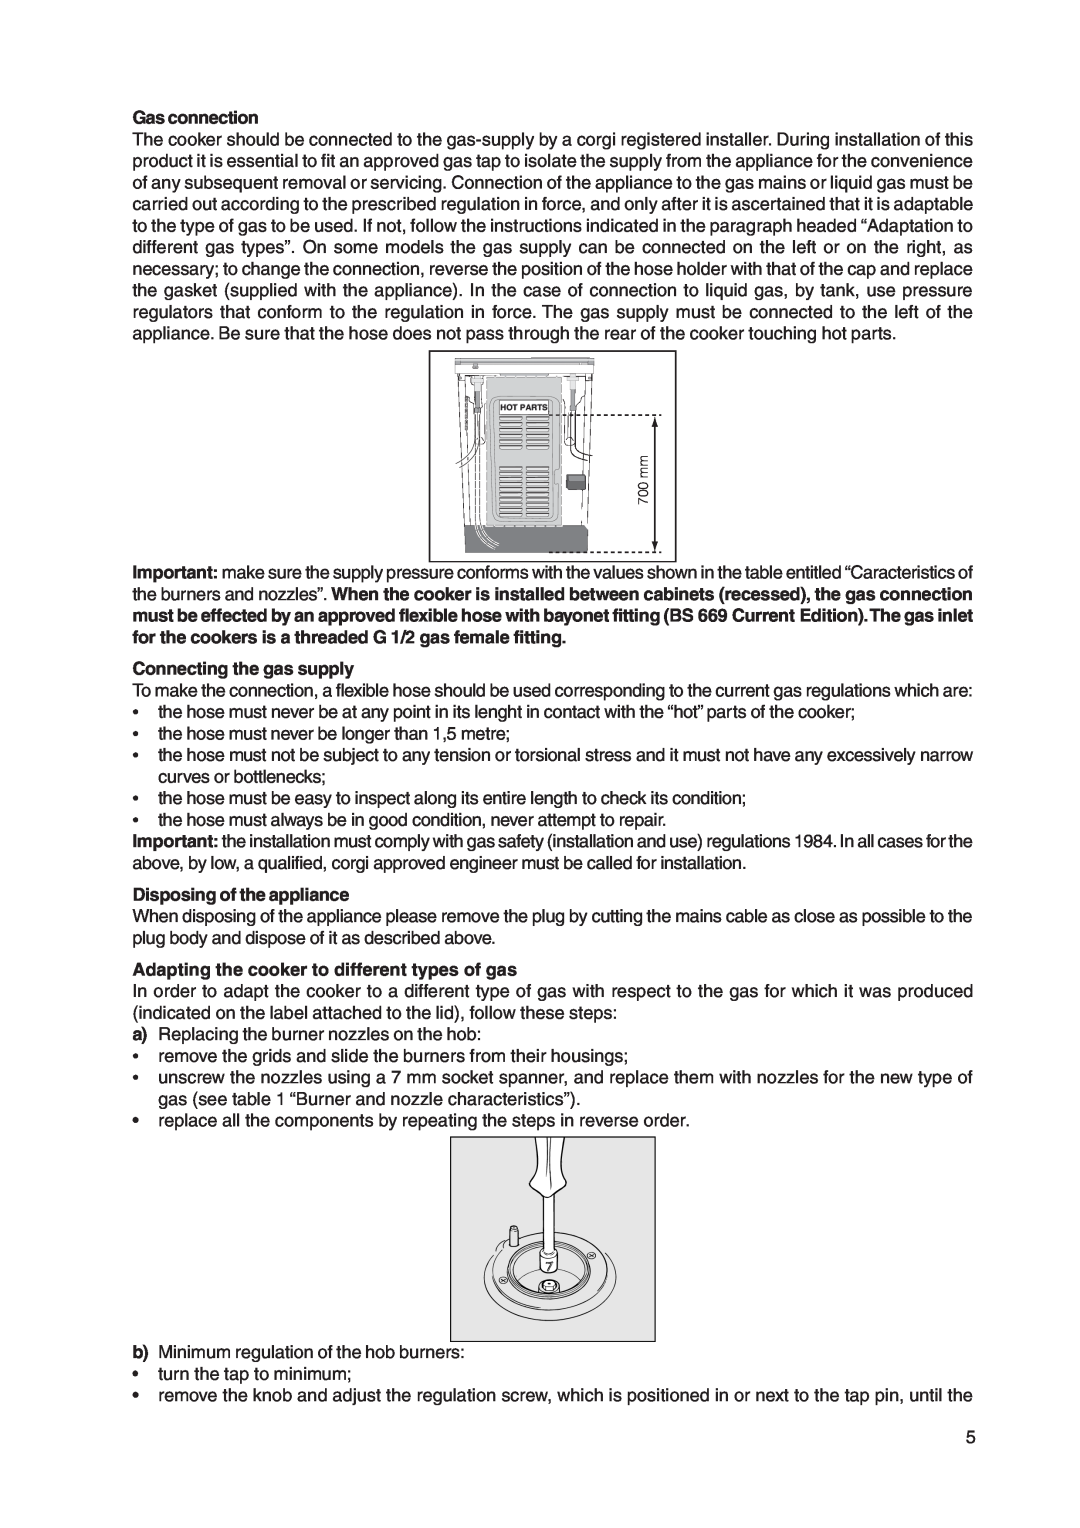 Indesit KD3G11/G manual Gas connection, Connecting the gas supply, Disposing of the appliance 